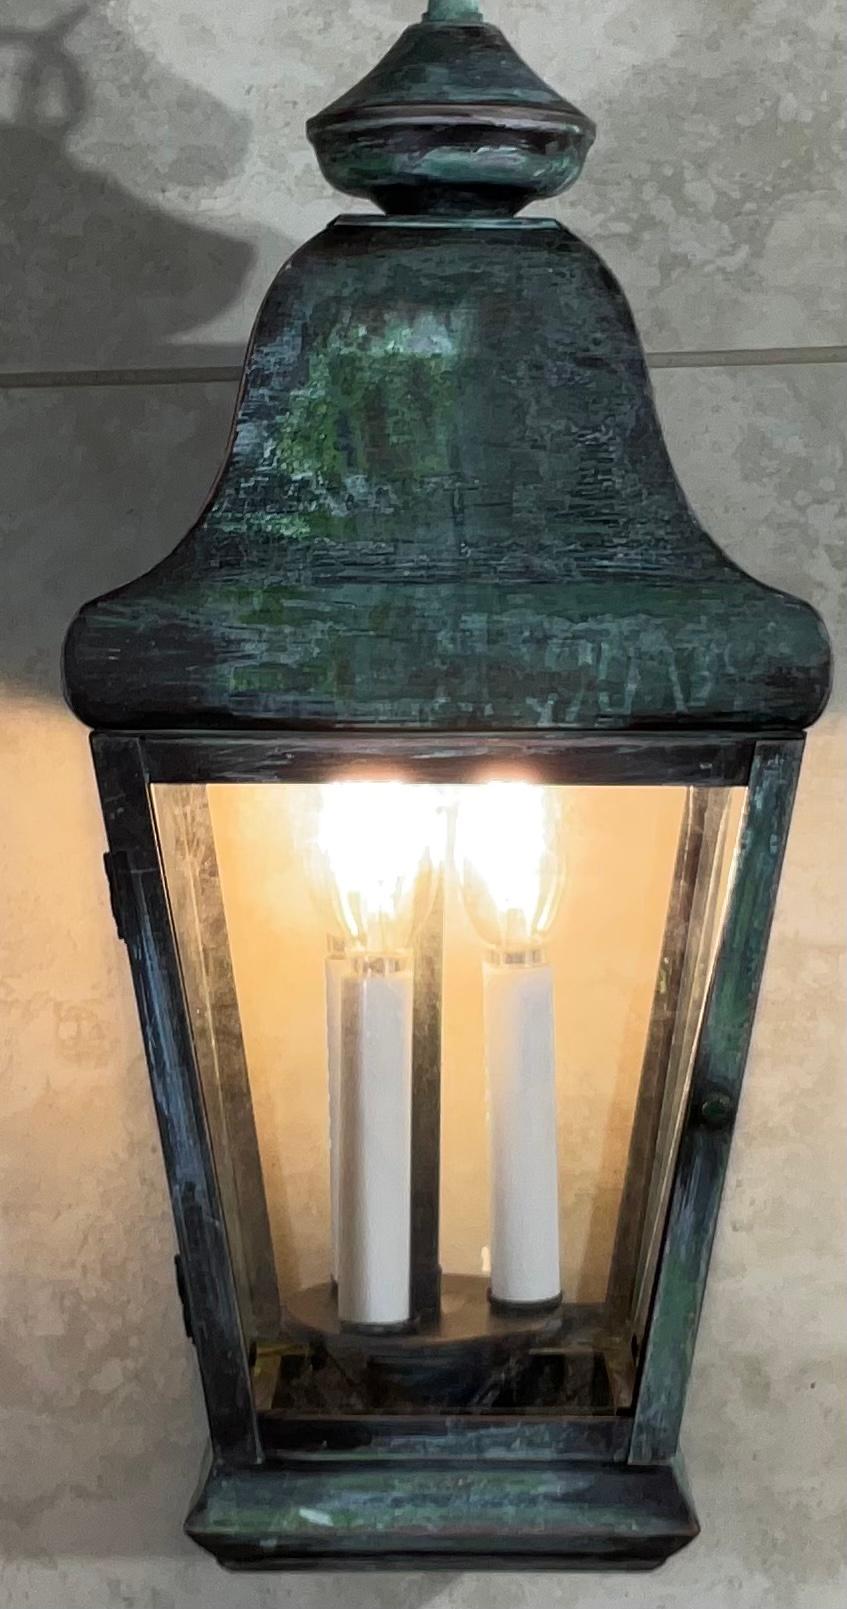 Quality handmade of solid brass lantern with three 60 watt lights.
Electrified and ready to light. Beautiful oxidization patina.
Made in the US.
Could be used in wet location.